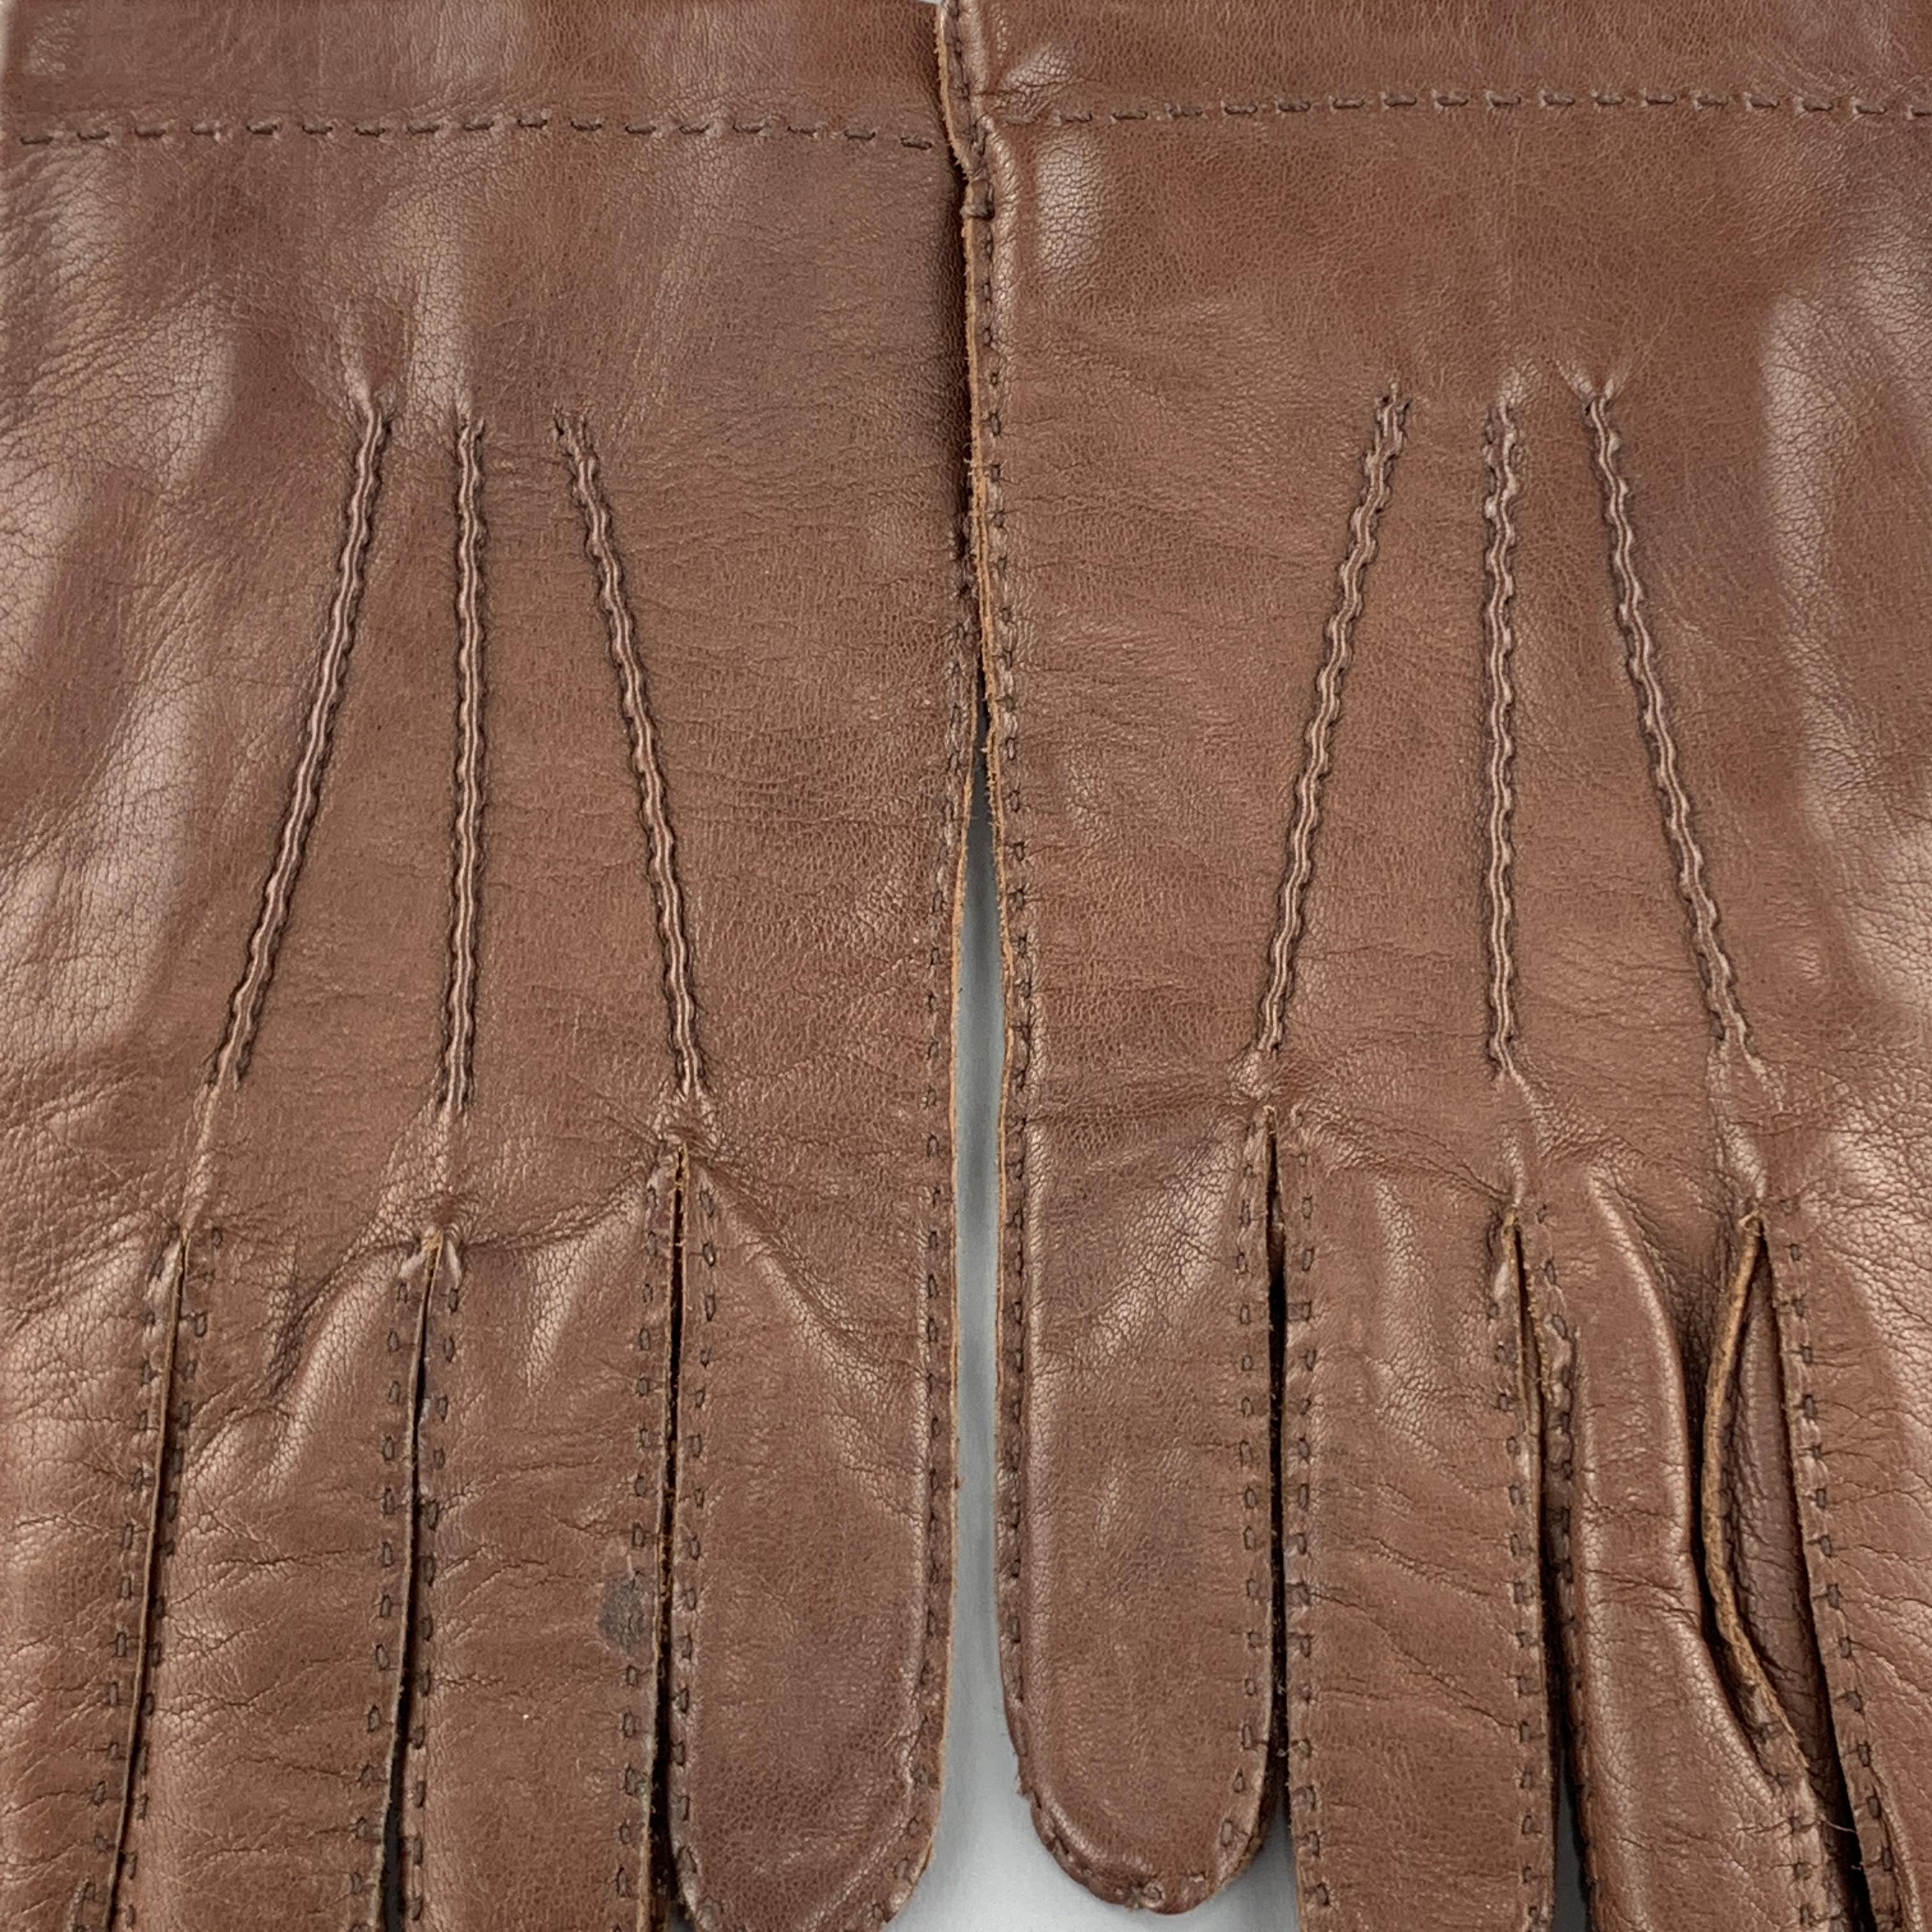 Vintage SULKA gloves come in light brown leather with top stitching and silk liner. Made in Italy.

Very Good Pre-Owned Condition.
Marked: 9

Width:4 in.
Length: 9.25 in.